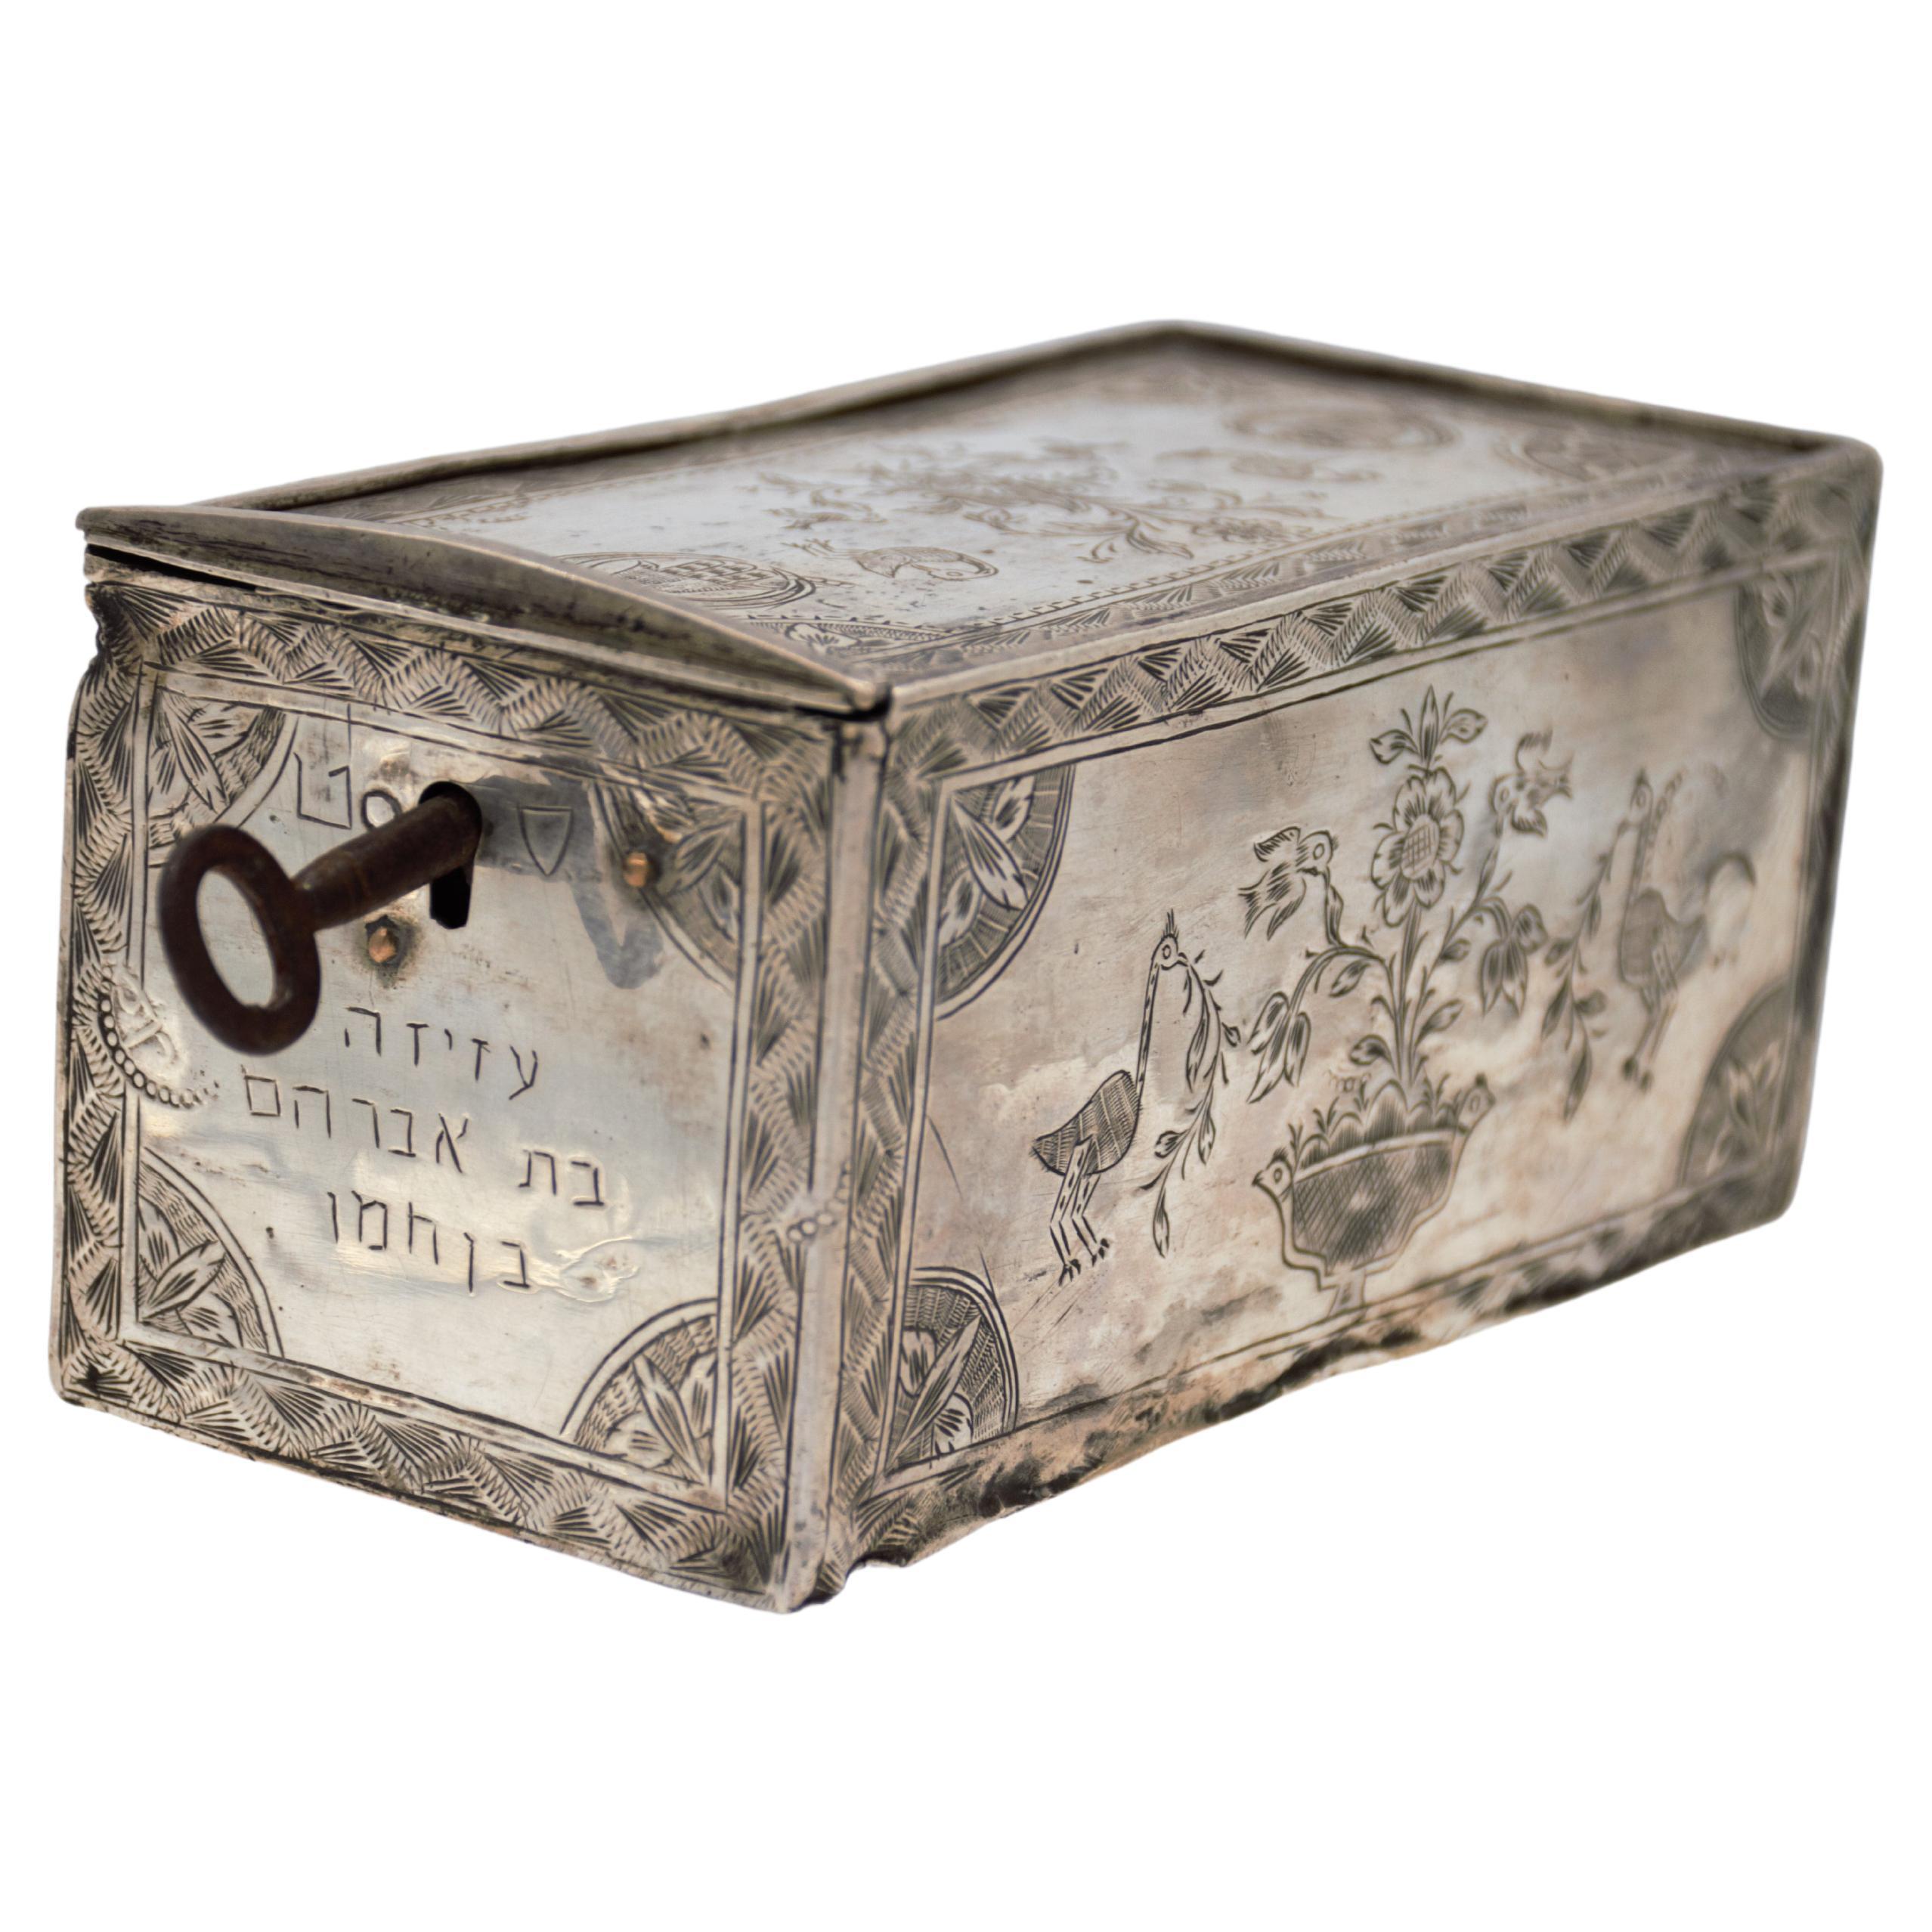 extremely rare Algerian Judaica silver, jewish Dowry box early 19th century For Sale